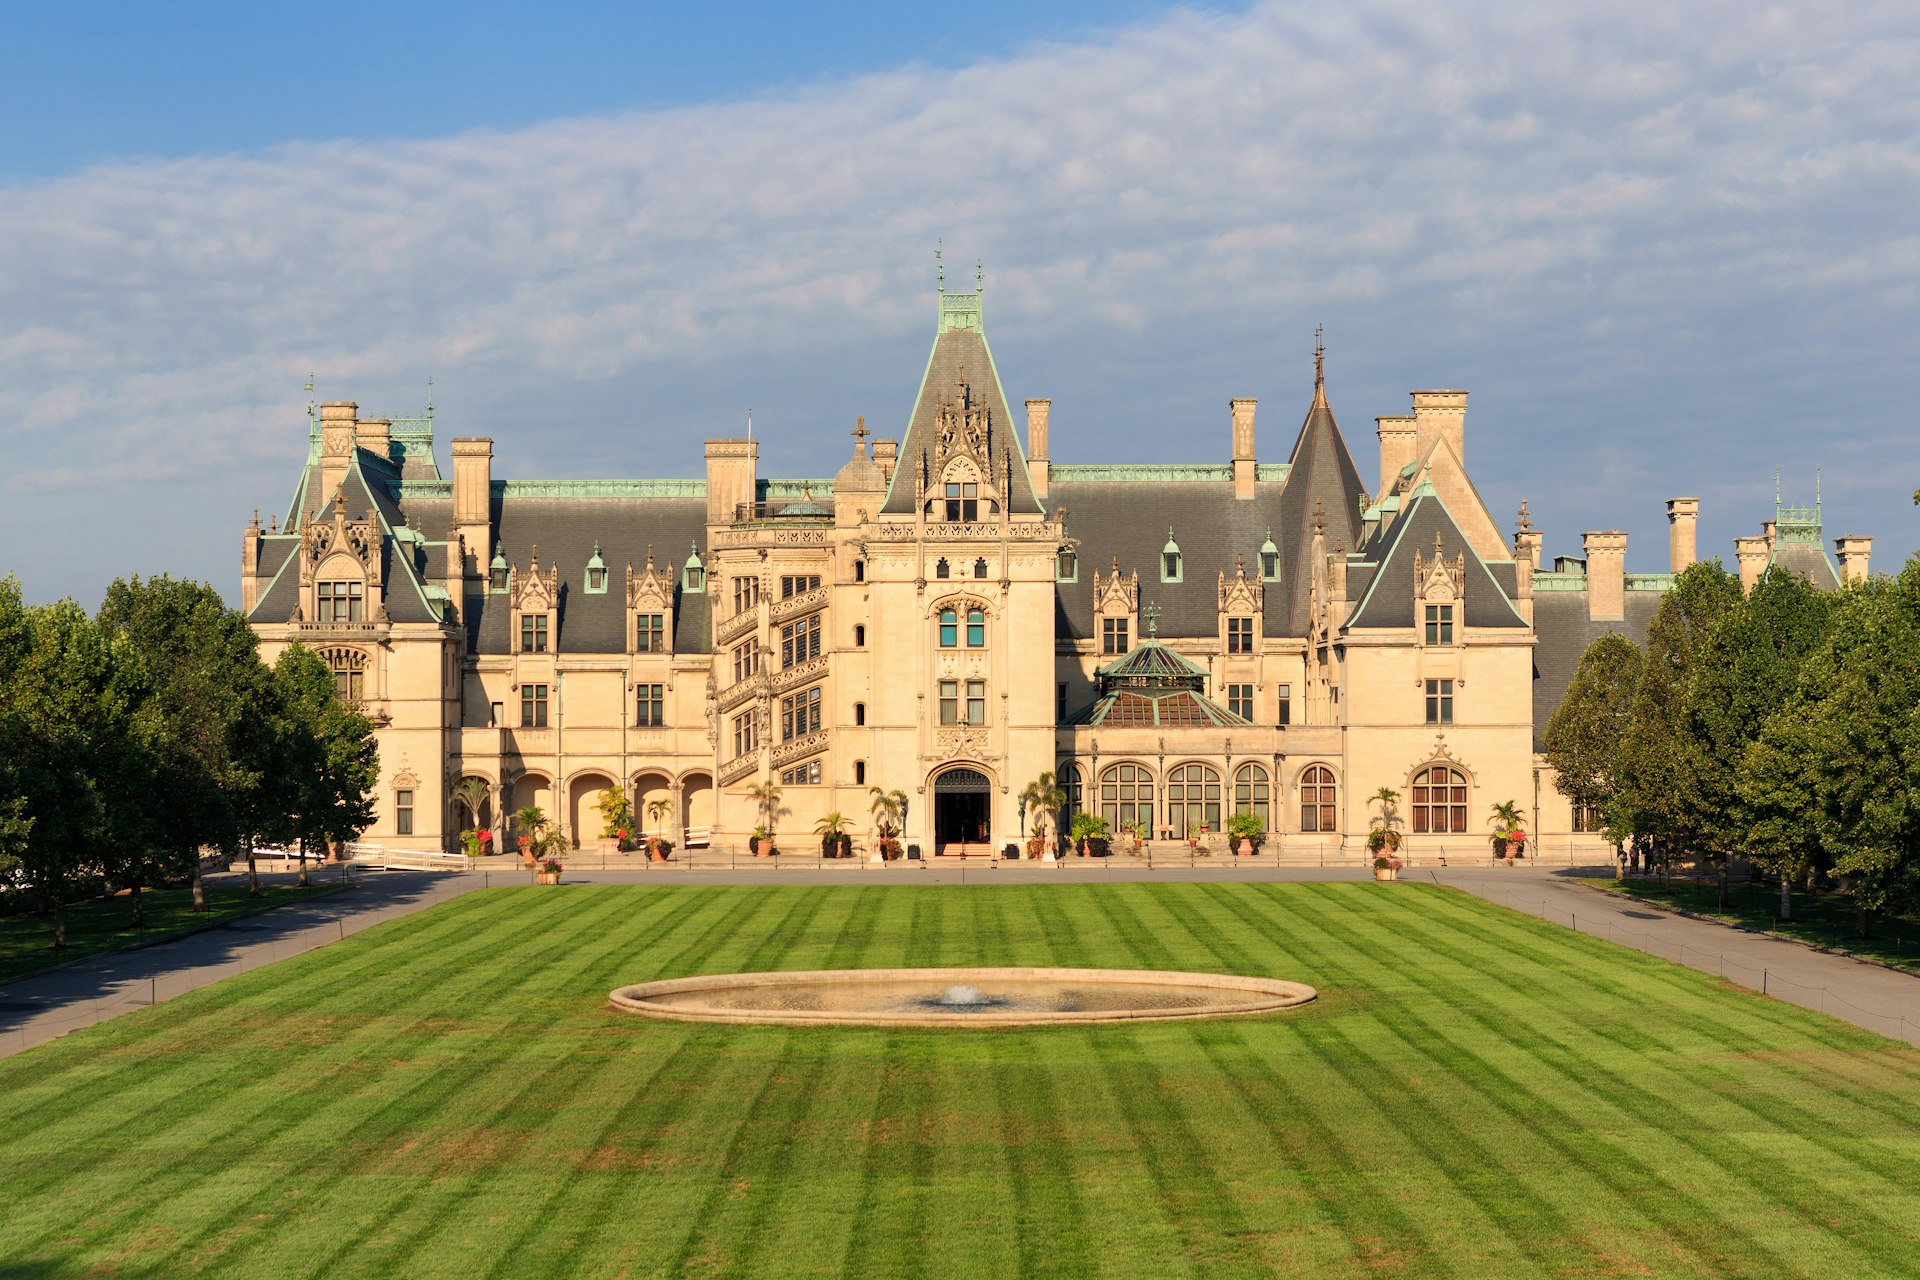 The stately Biltmore House on the Biltmore Estate grounds, Asheville, North Carolina